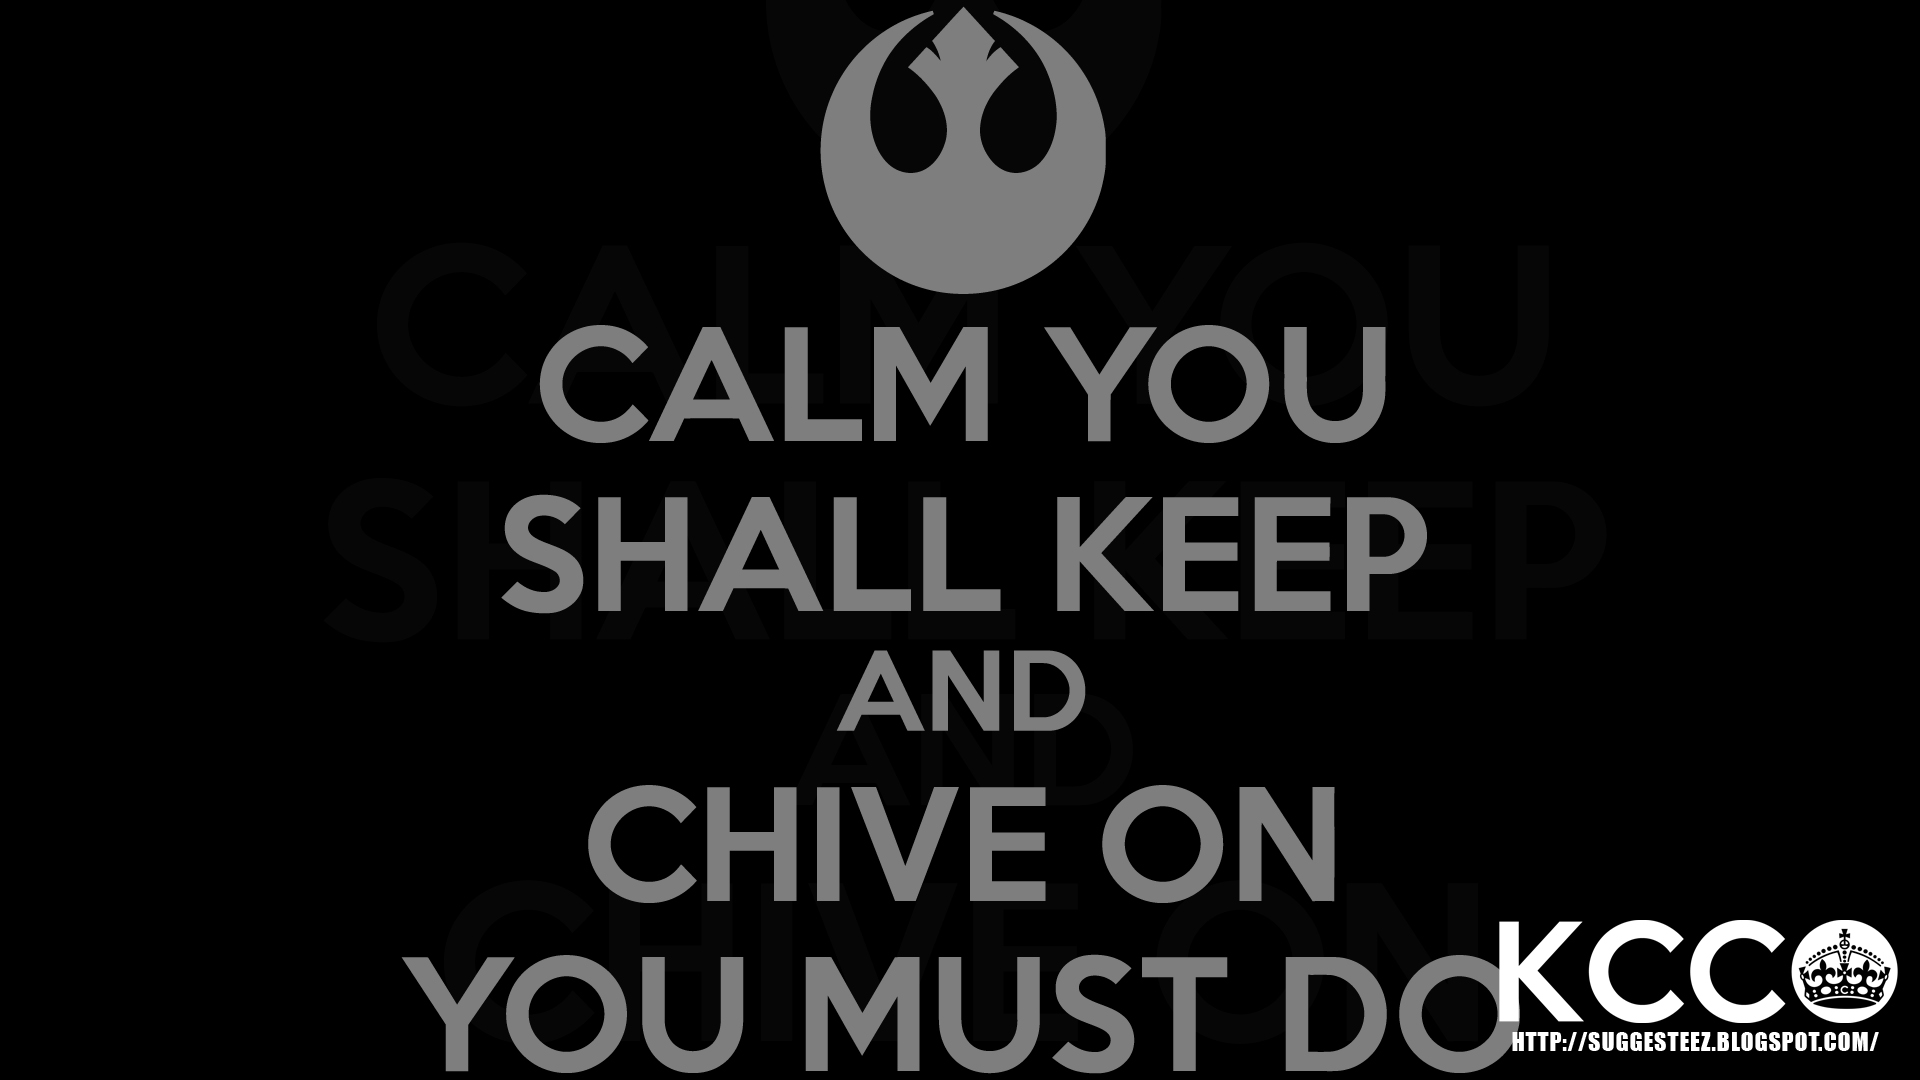 HD Calm You Shall Keep and Chive On You Must Do by suggesteez on